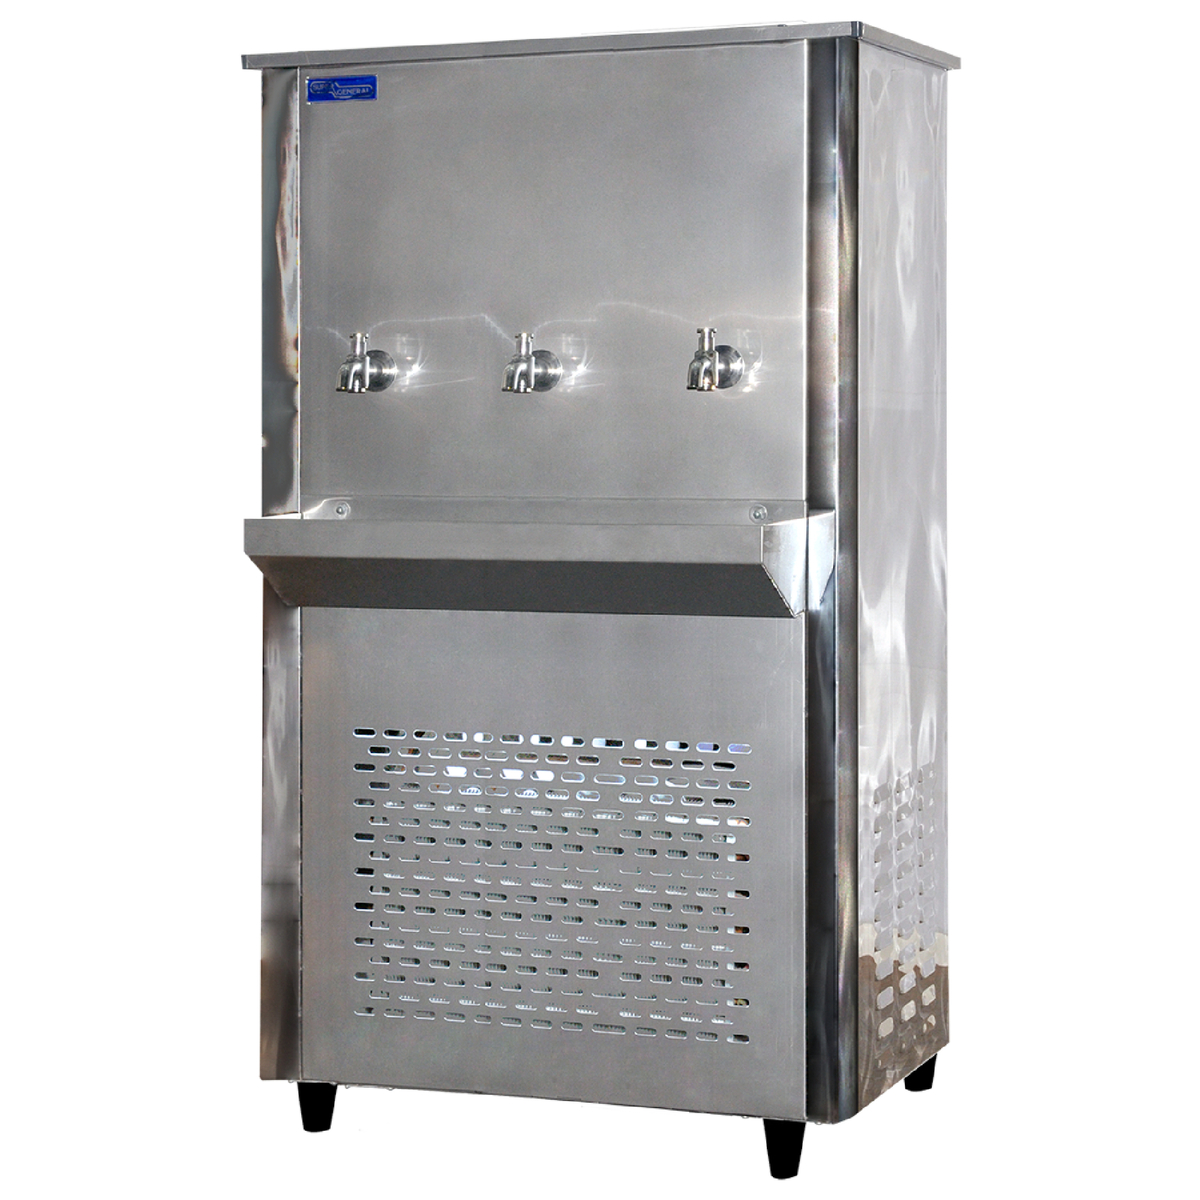 Super General Water Cooler, 45 gallons Capacity, 3 Tap, SG AA 52T3